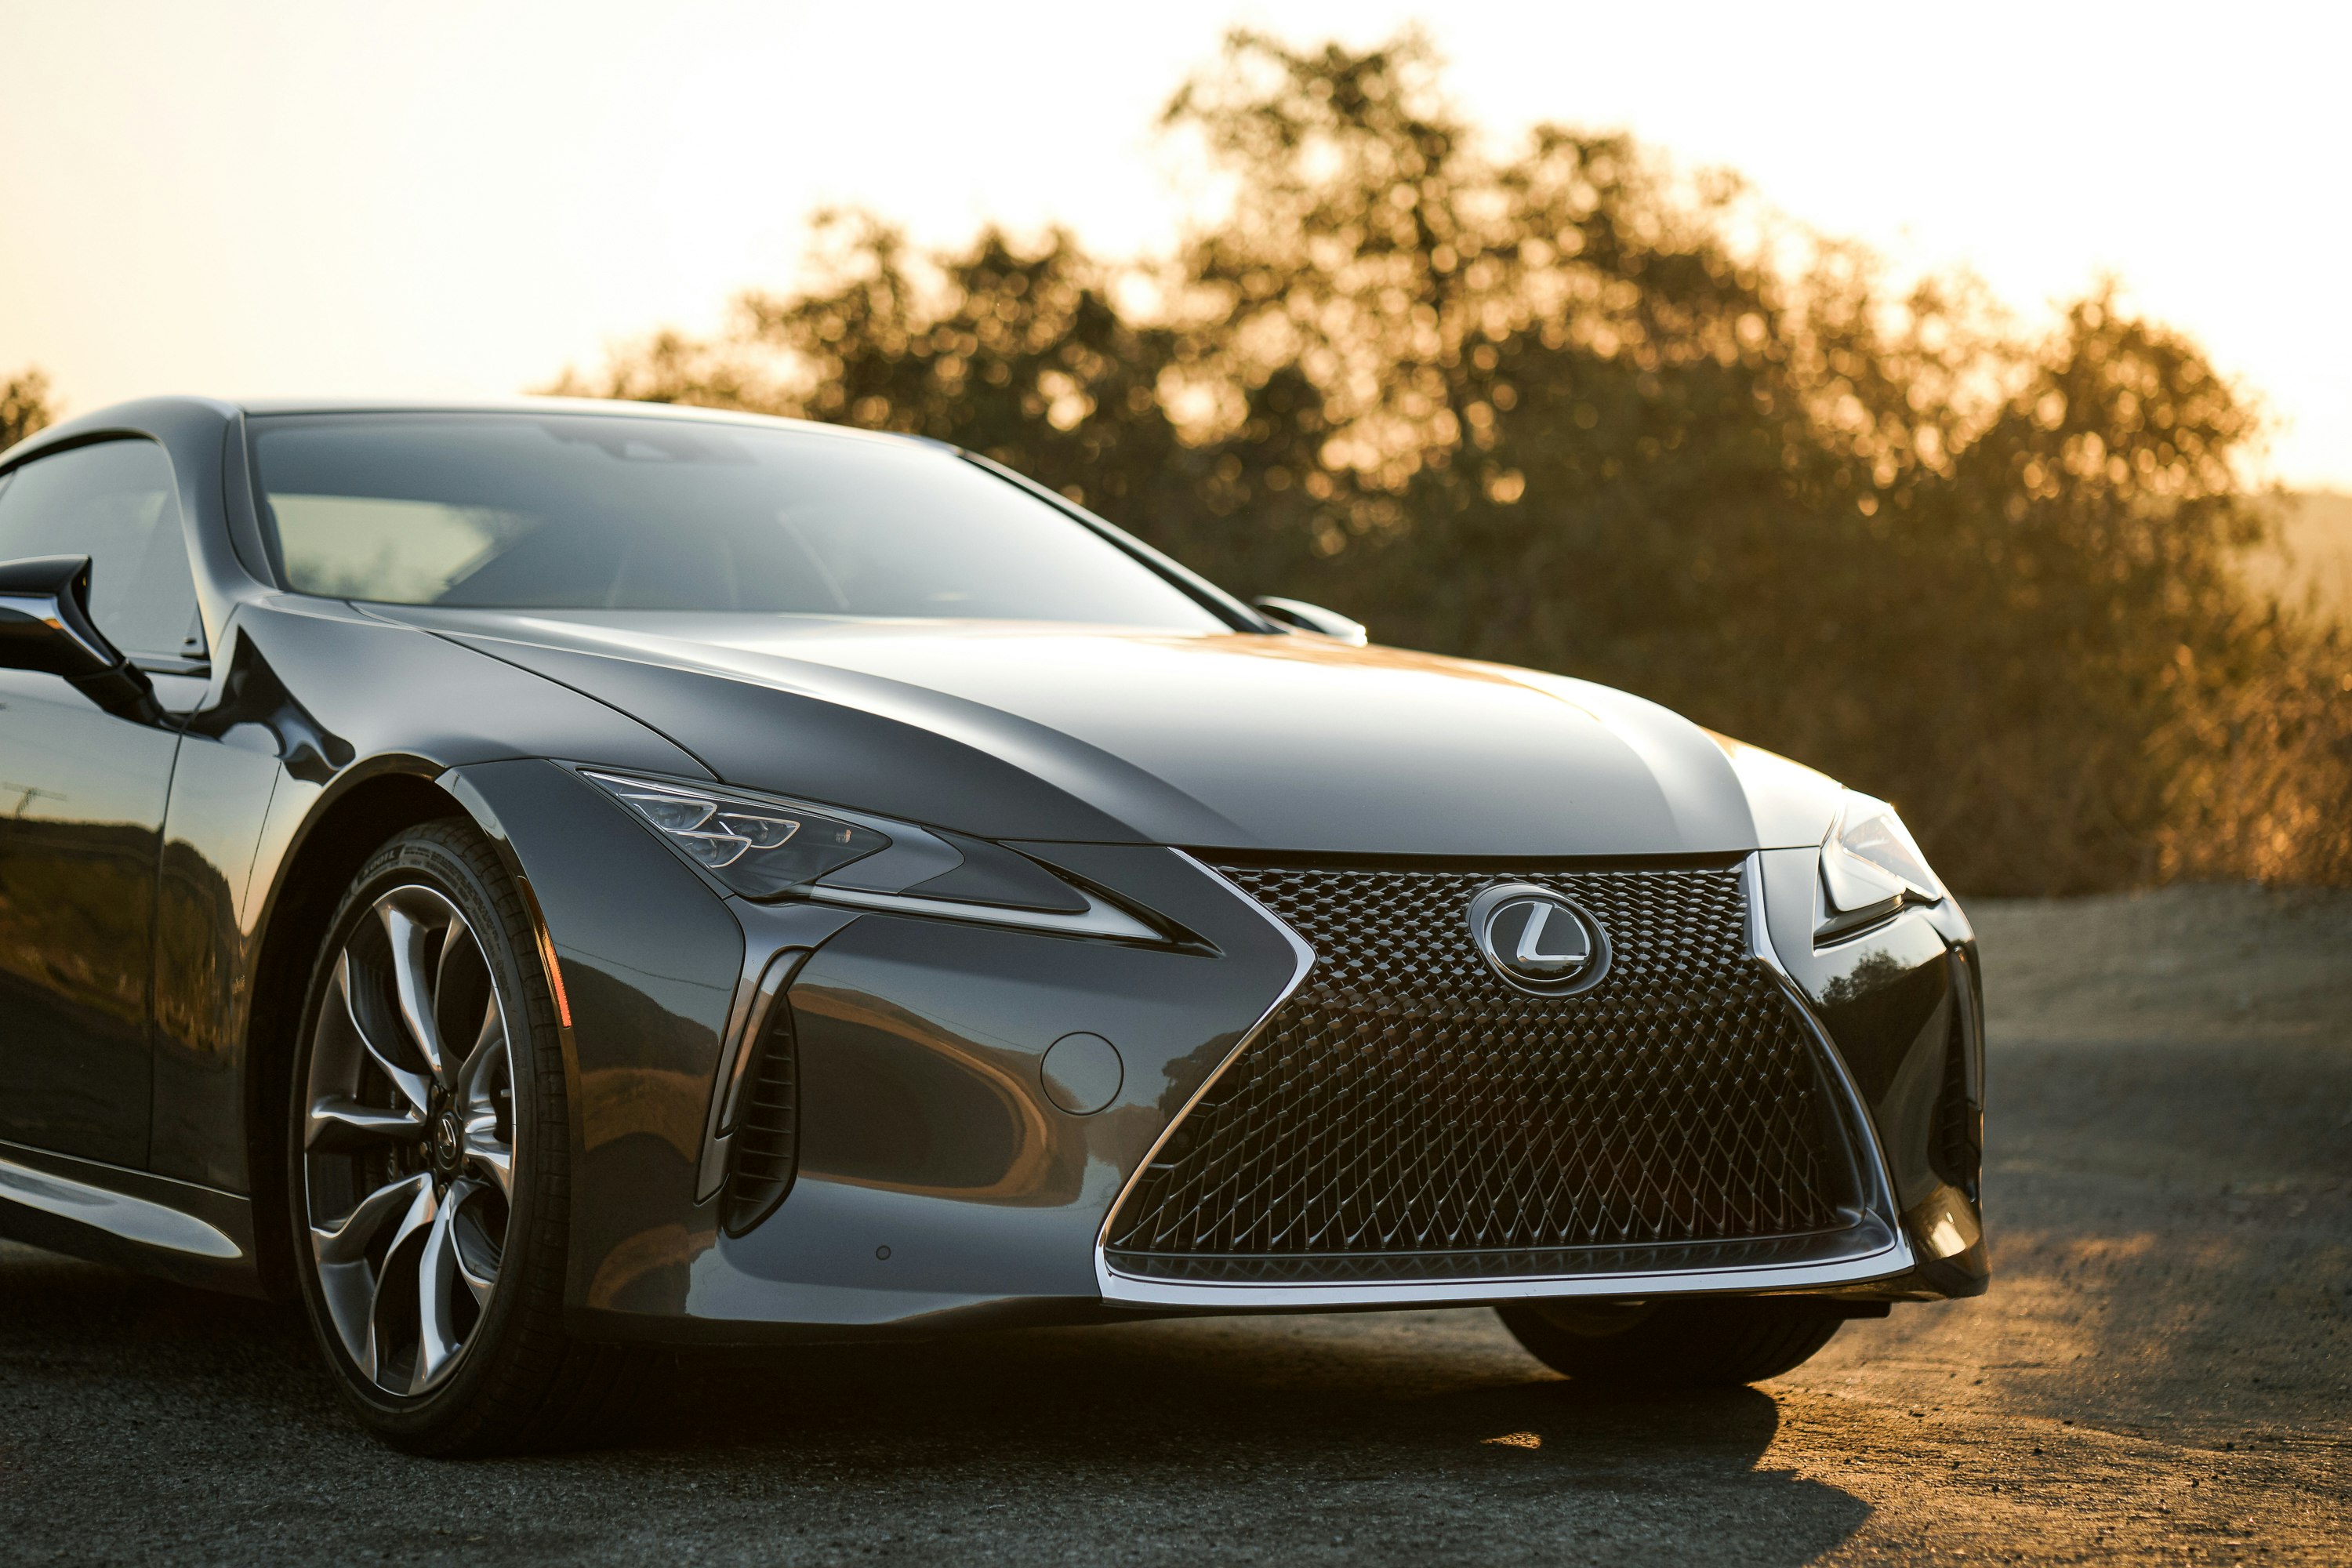 A peaceful evening with the Lexus LC 500.